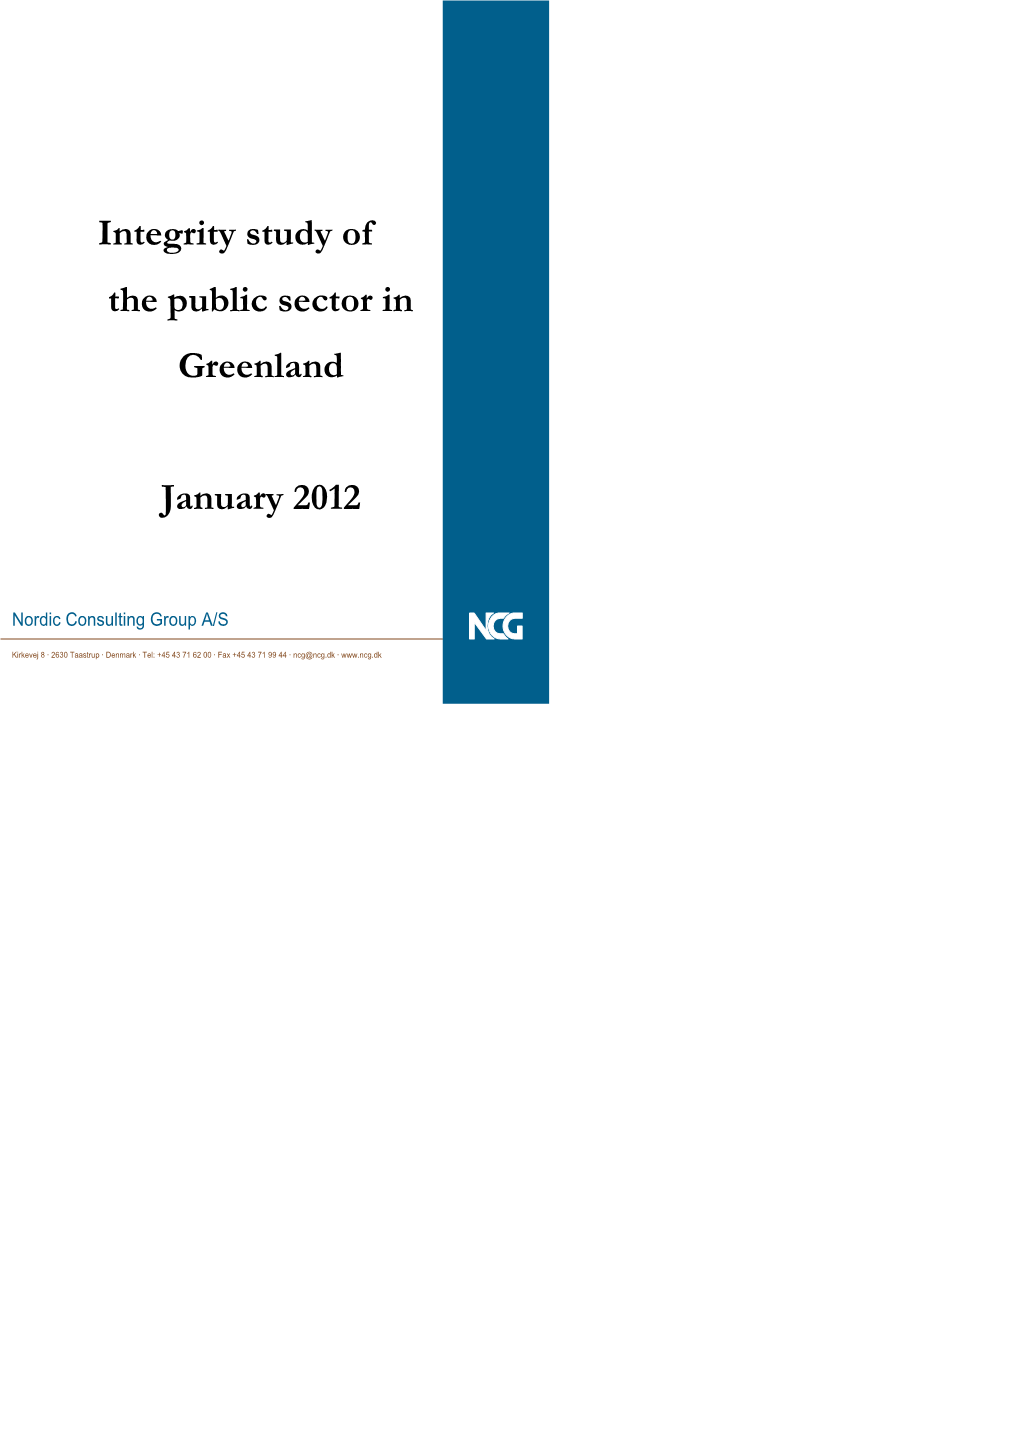 Integrity Study of the Public Sector in Greenland January 2012